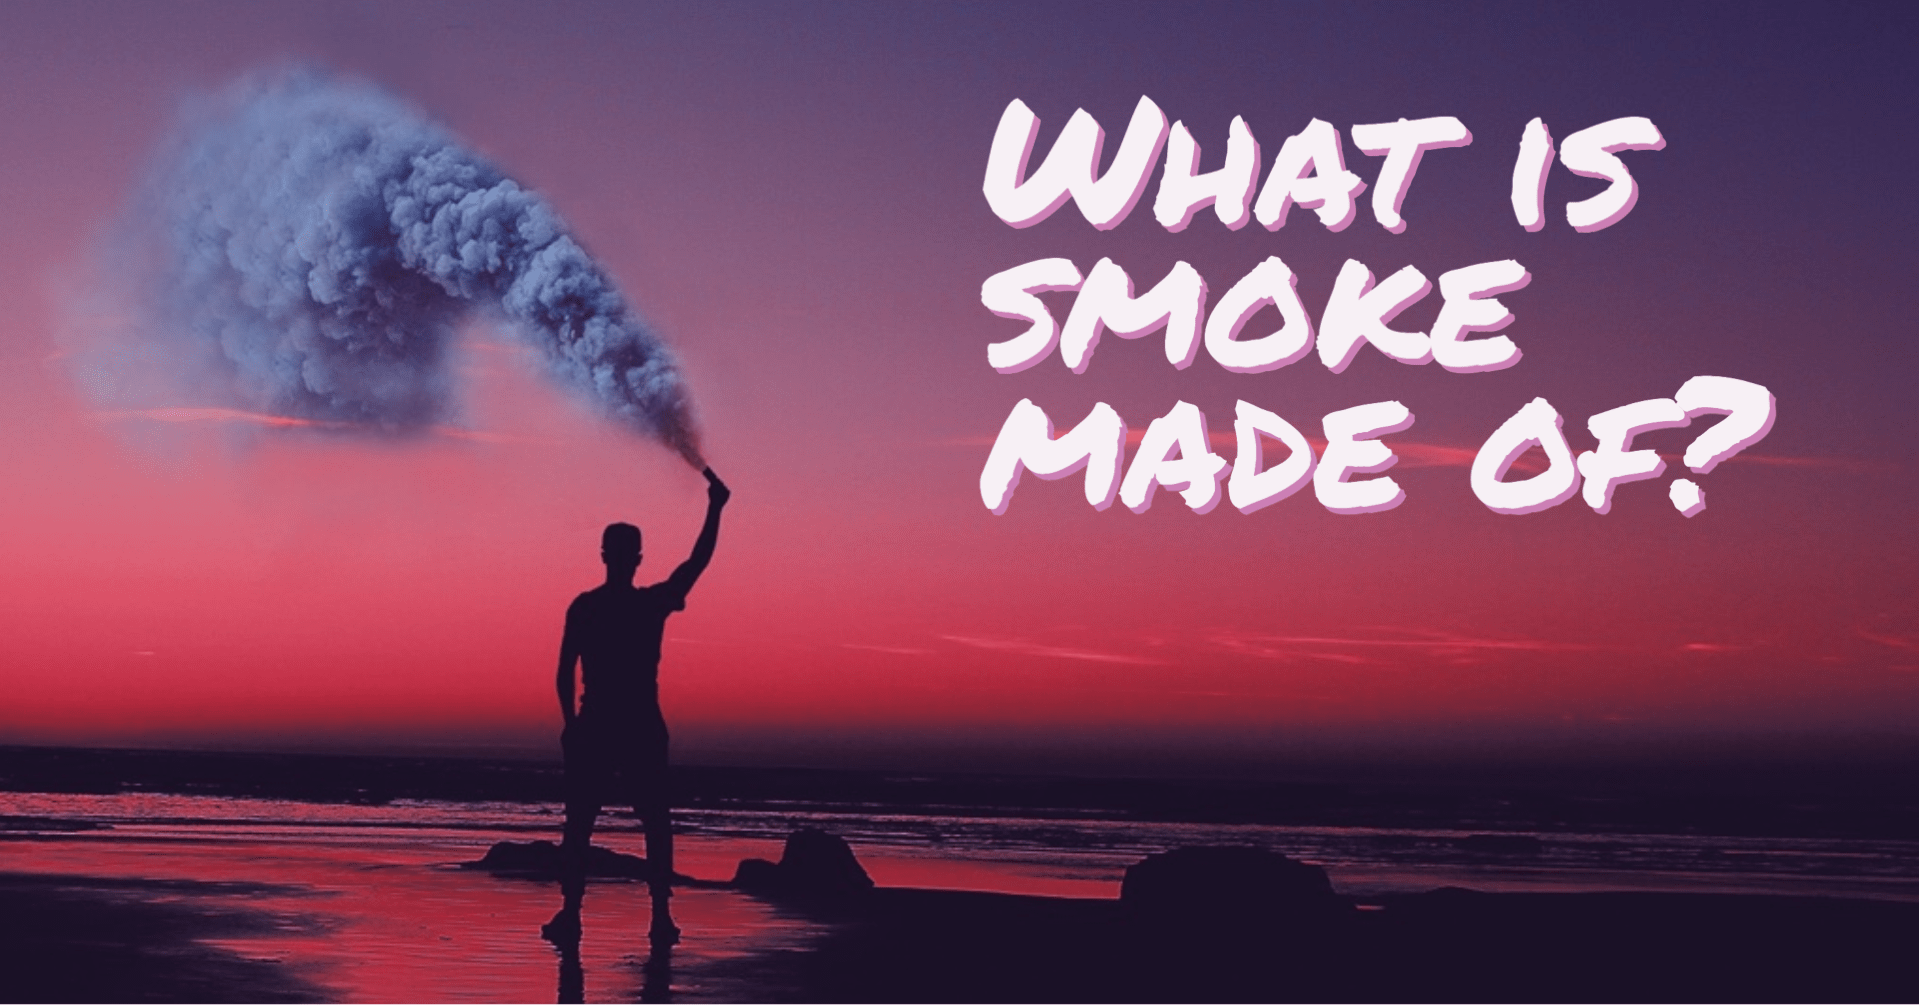 What is smoke made of?